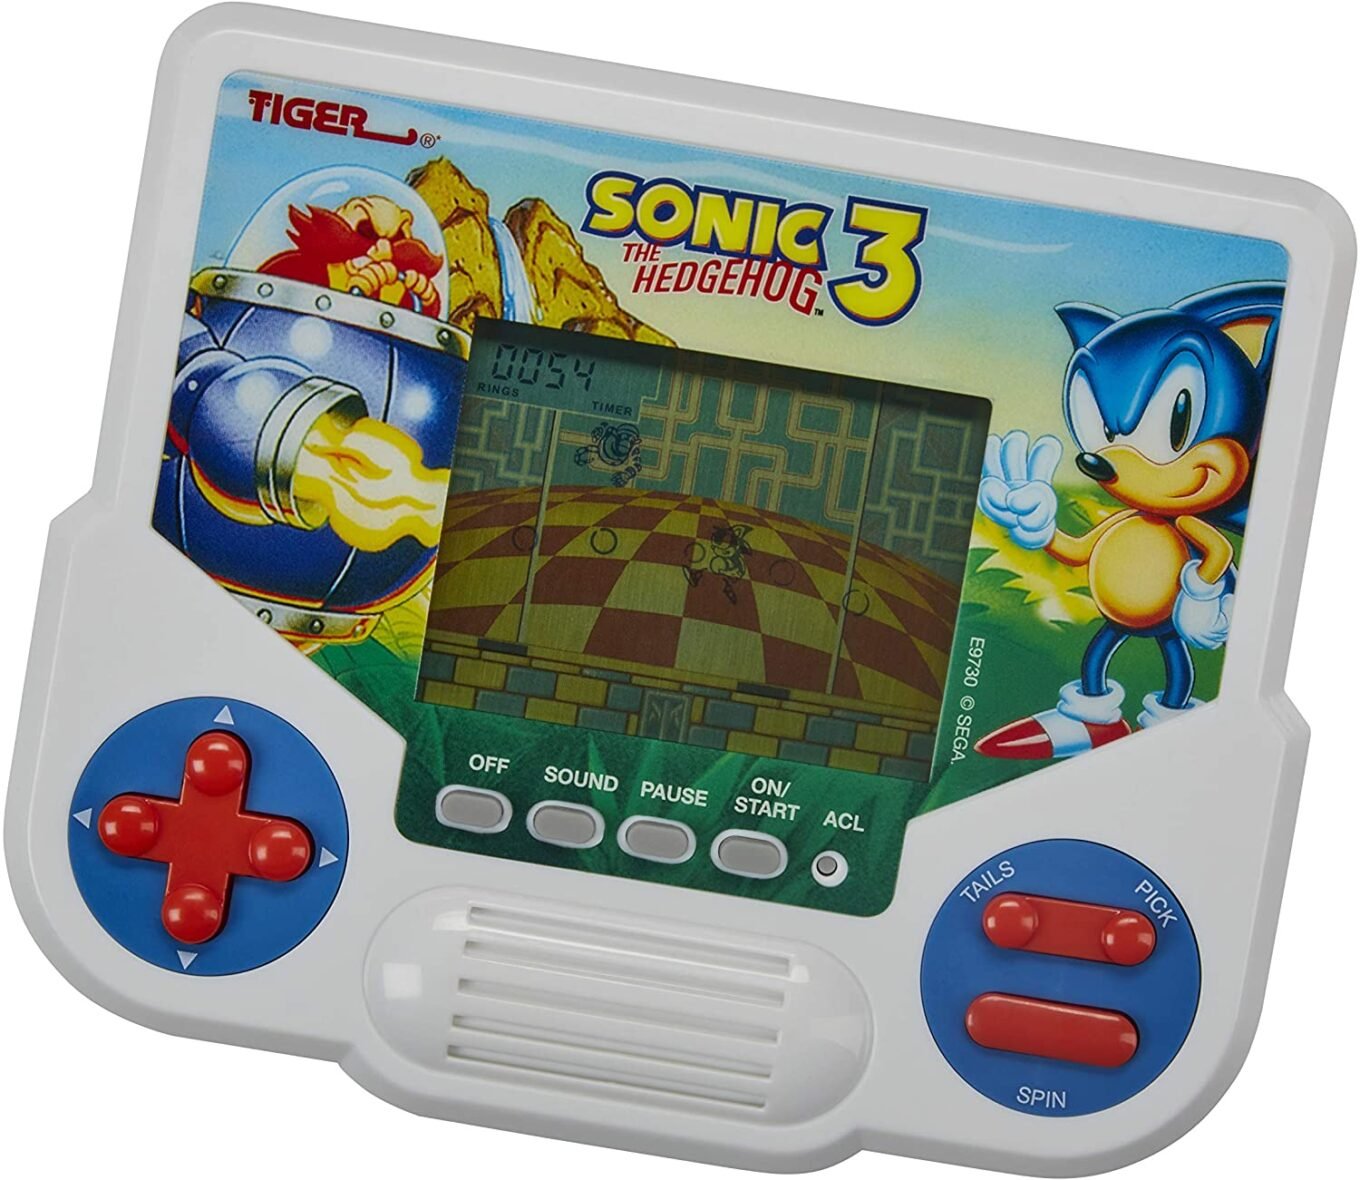 Tiger Electronics Sonic The Hedgehog 3 Electronic LCD Video Game, Retro-Inspired Edition